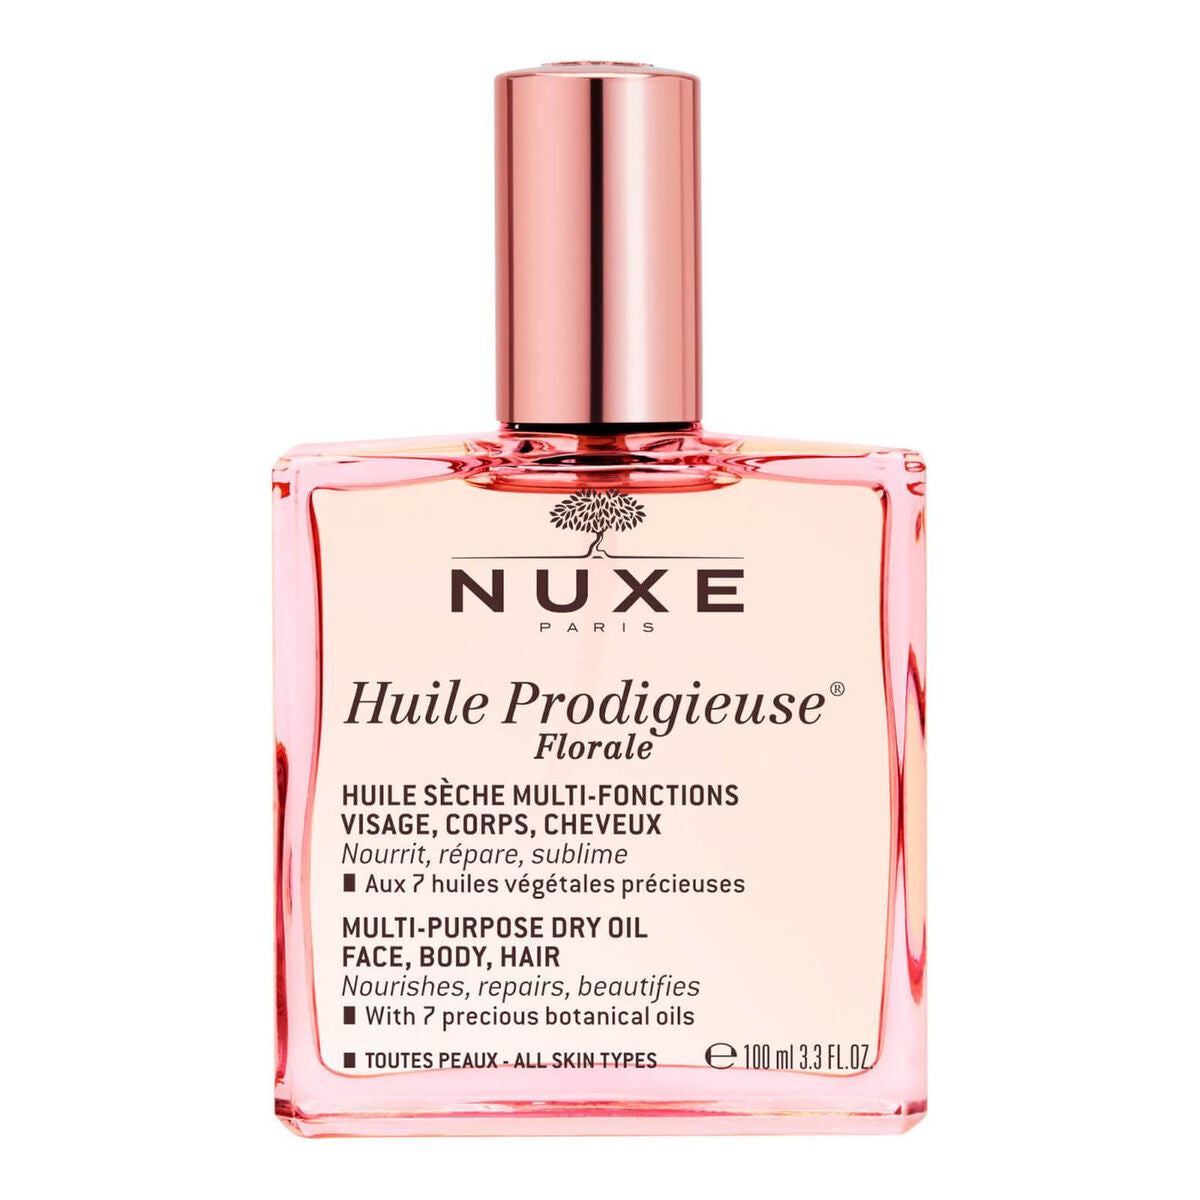 Body Oil Nuxe Huile Prodigieuse Florale Multifunction 100 ml